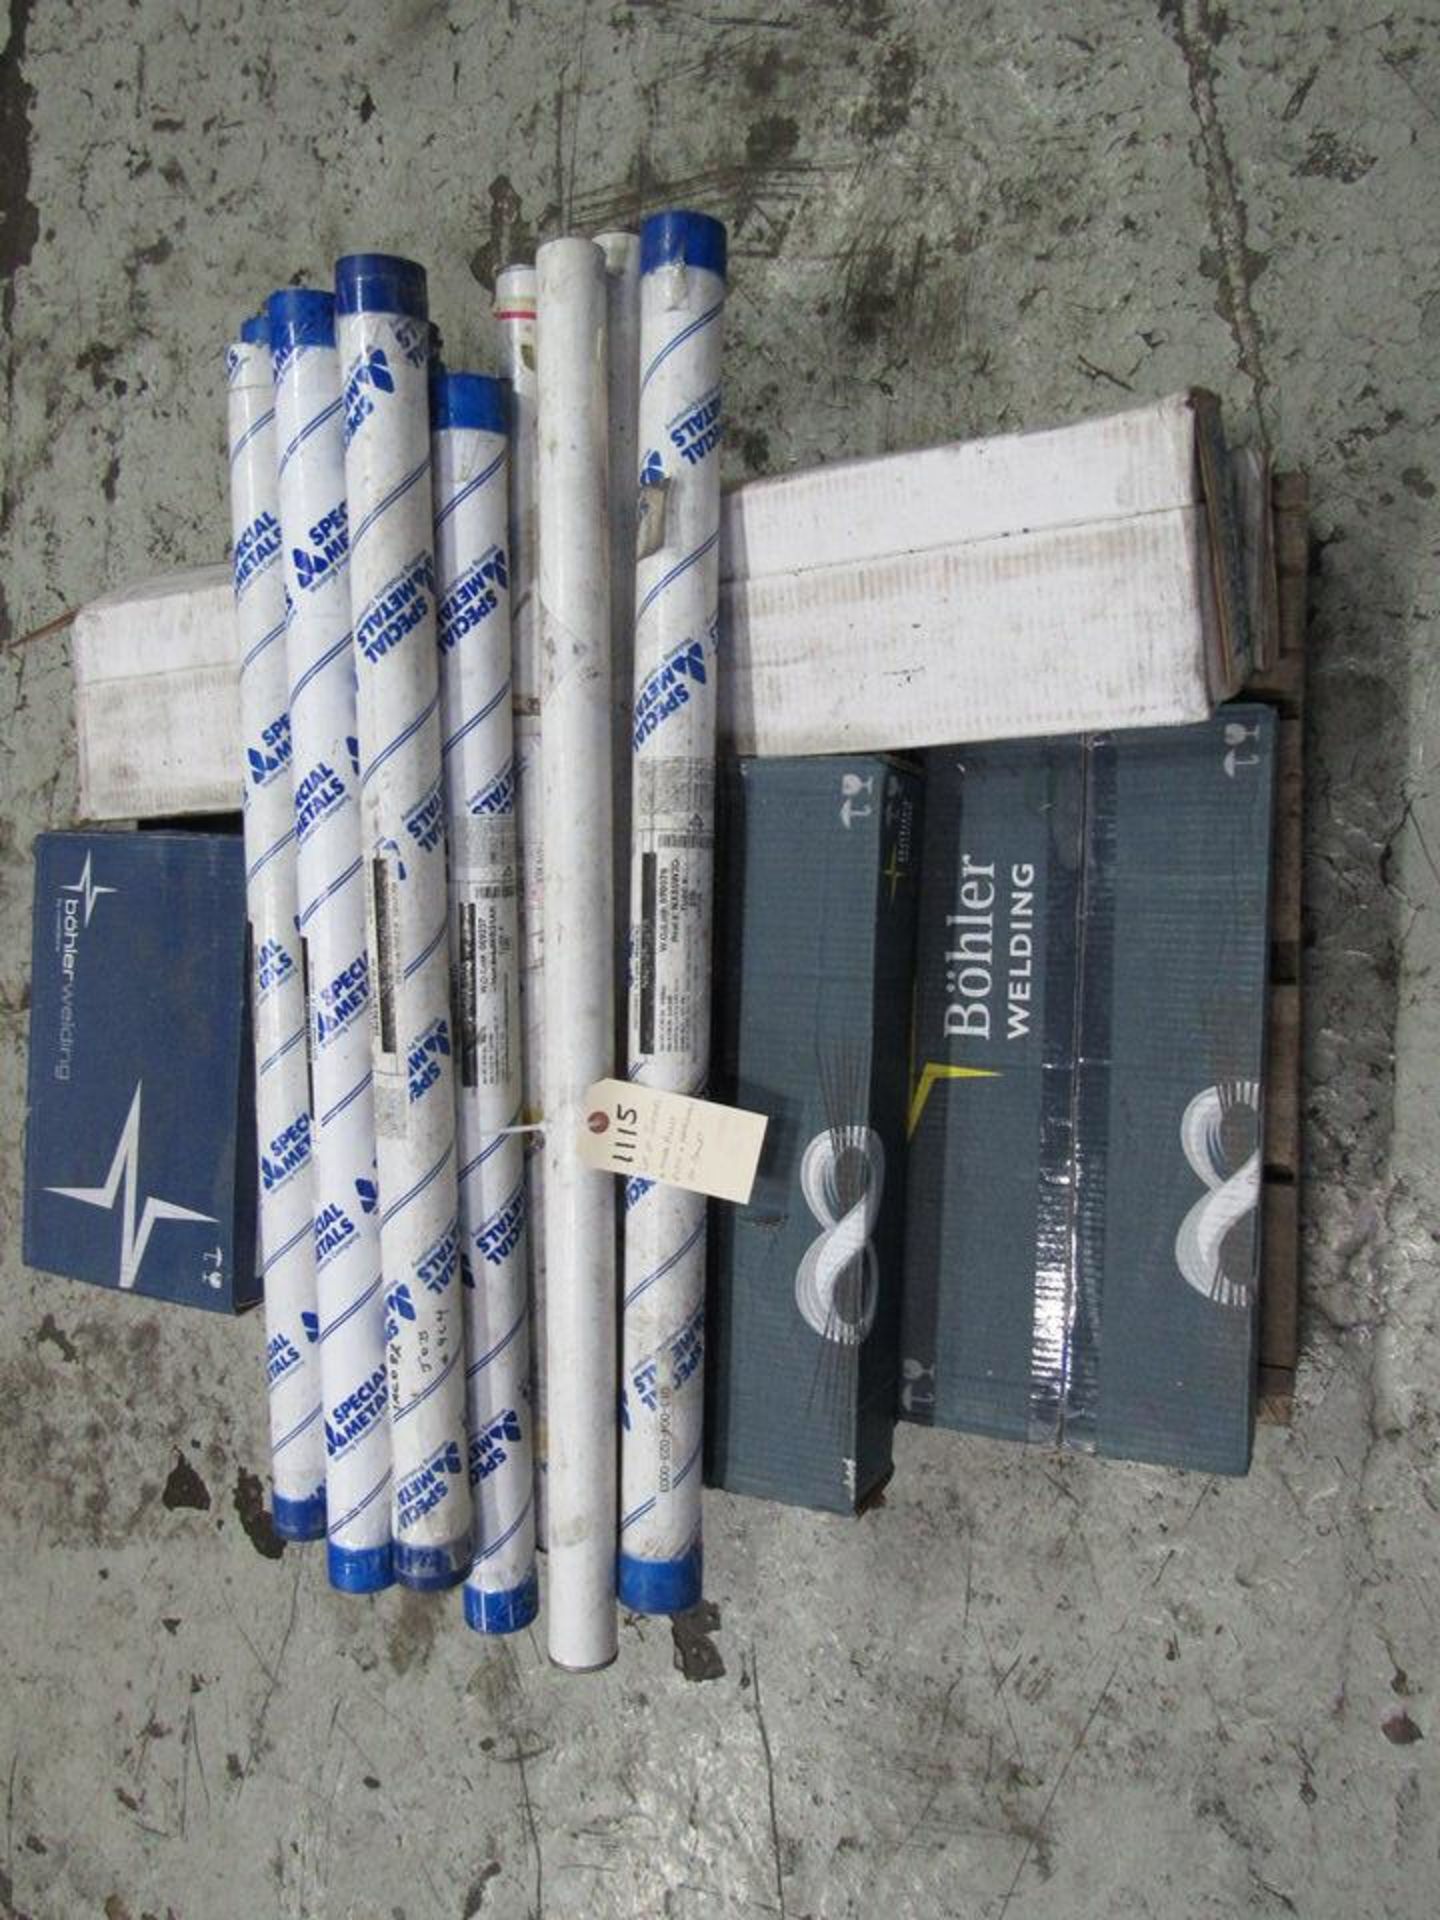 Lot of Inconel and Other Alloy Welding Rods on Pallet, [Special Materials, Inconel 740H, 0.093"